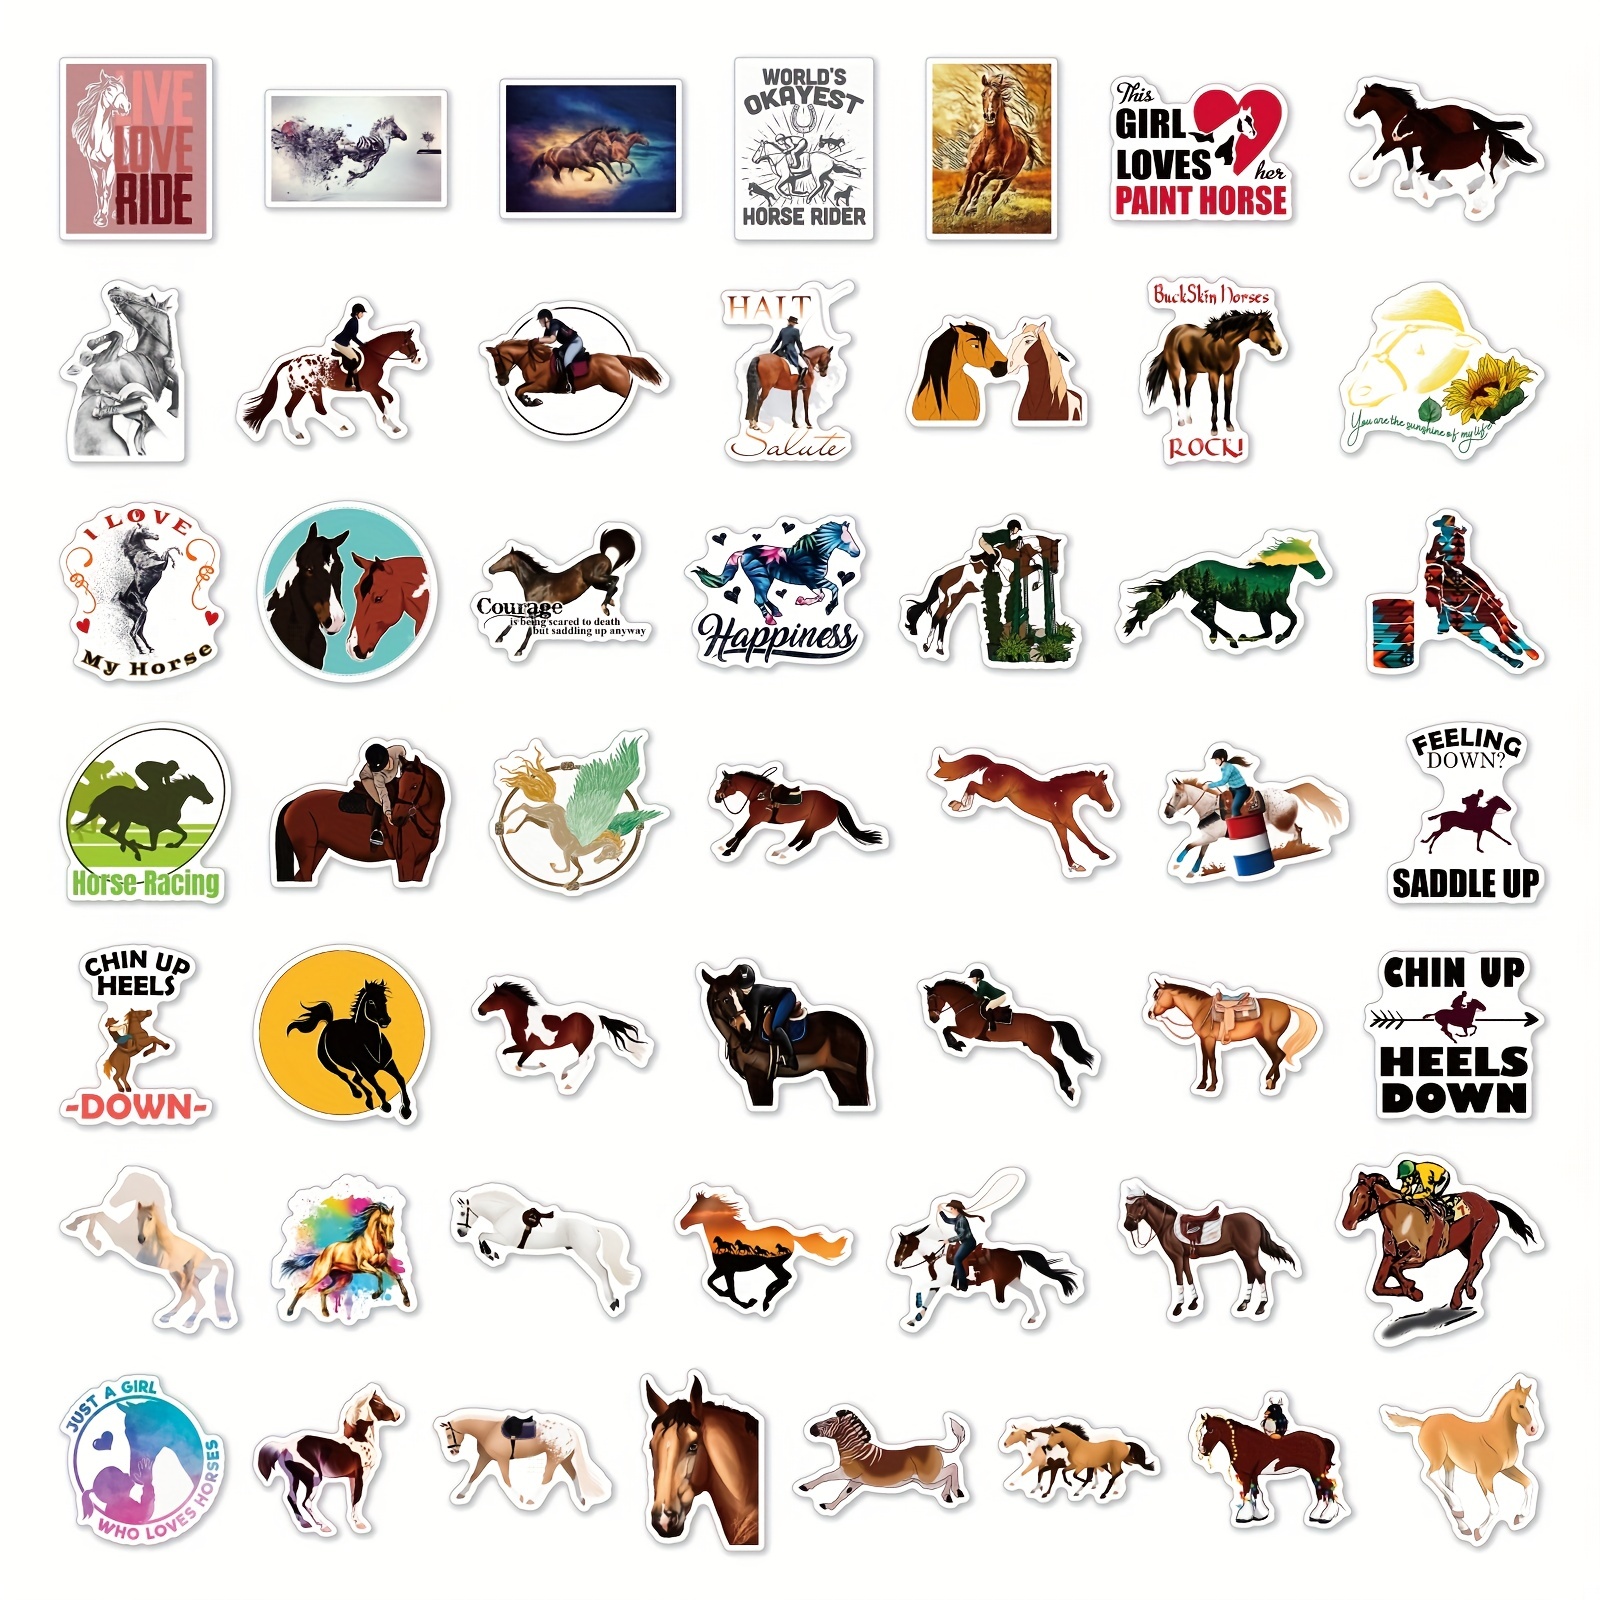 Horse Riding Stickers Horses Racing Vinyl Stickers Pack of 50-Suitable for Laptop Travel Case Phone Car Scrapbook Water Bottle Bike Computer Phone